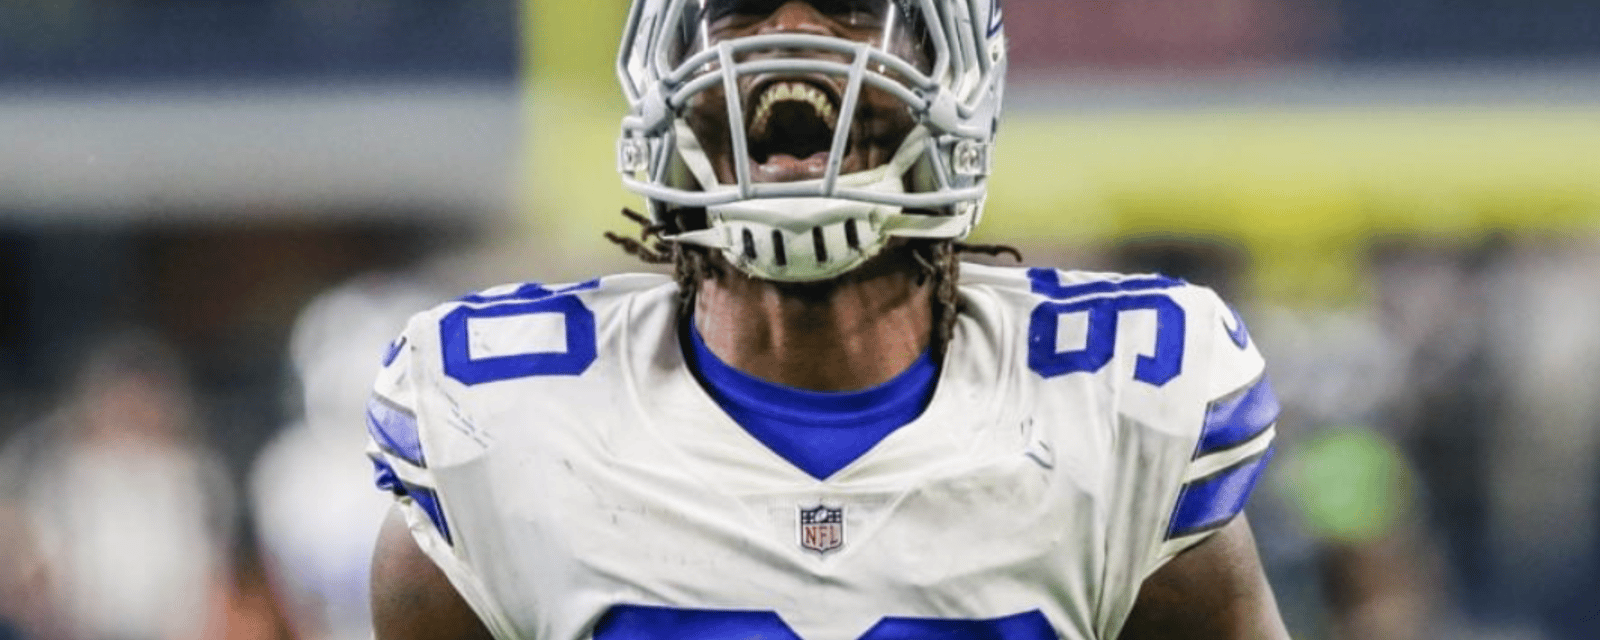 Cowboys' DeMarcus Lawrence puts Jets on blast after win 